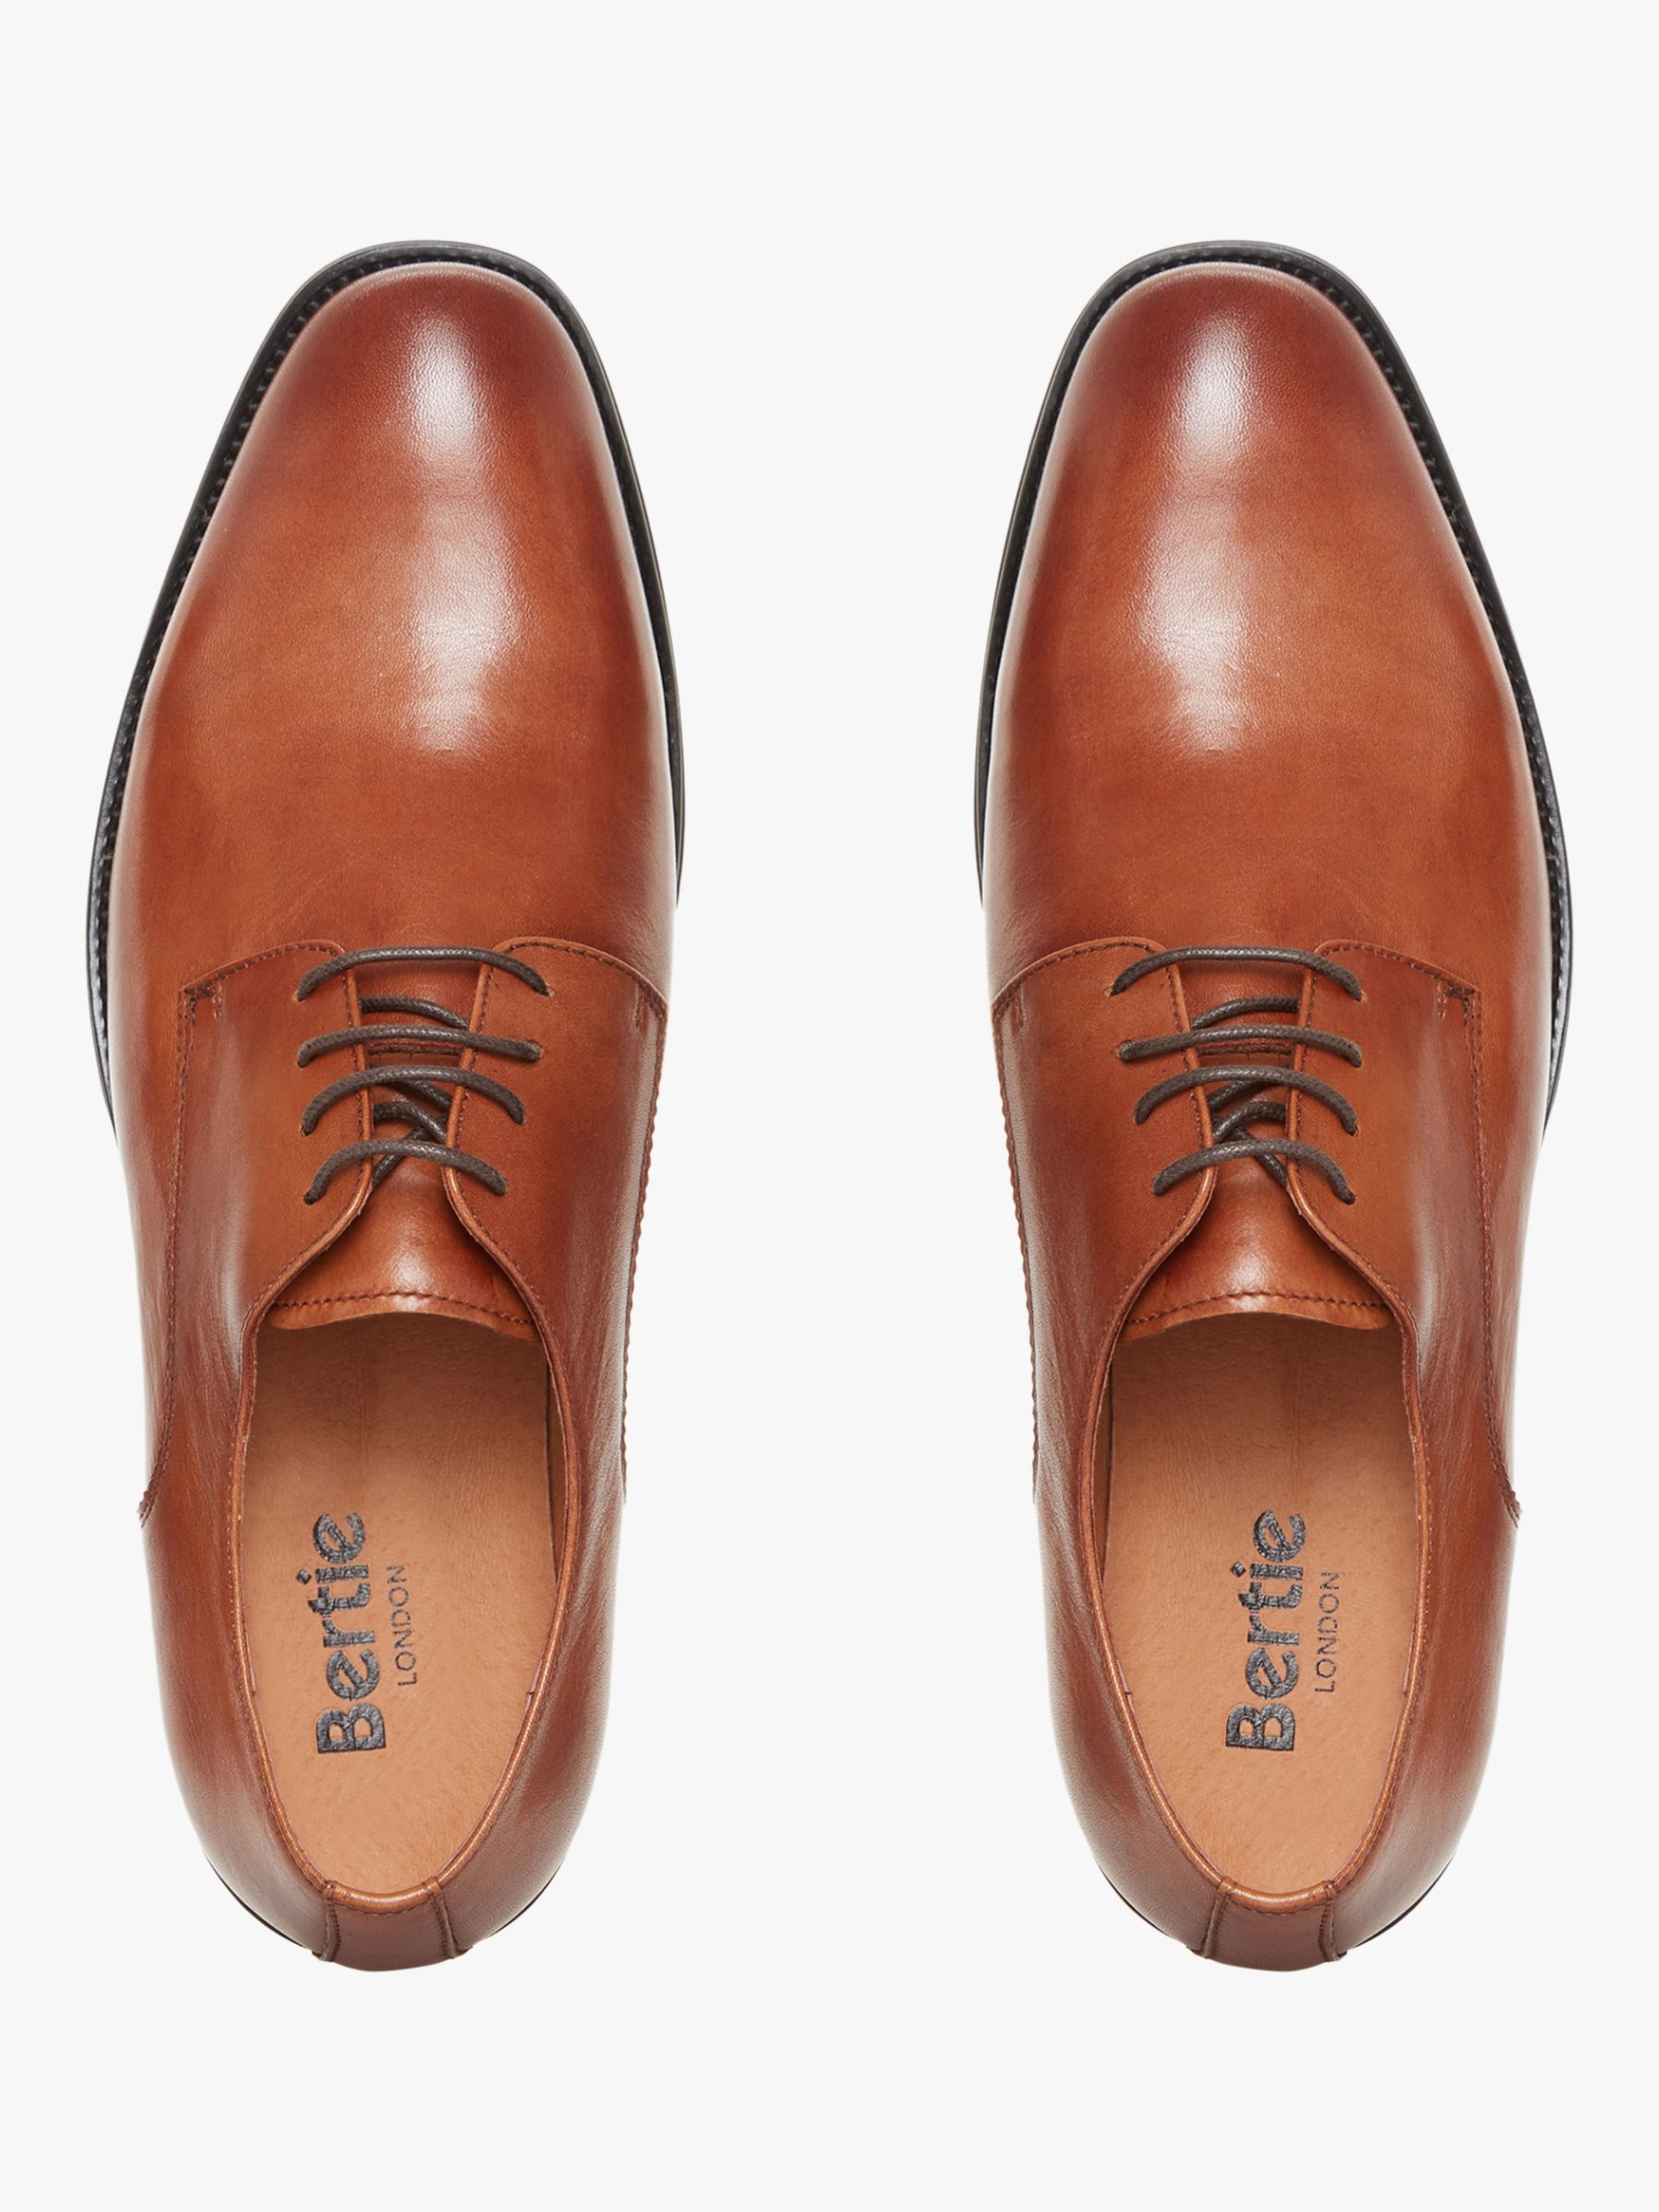 Bertie Saddle Leather Derby Shoes, Tan 